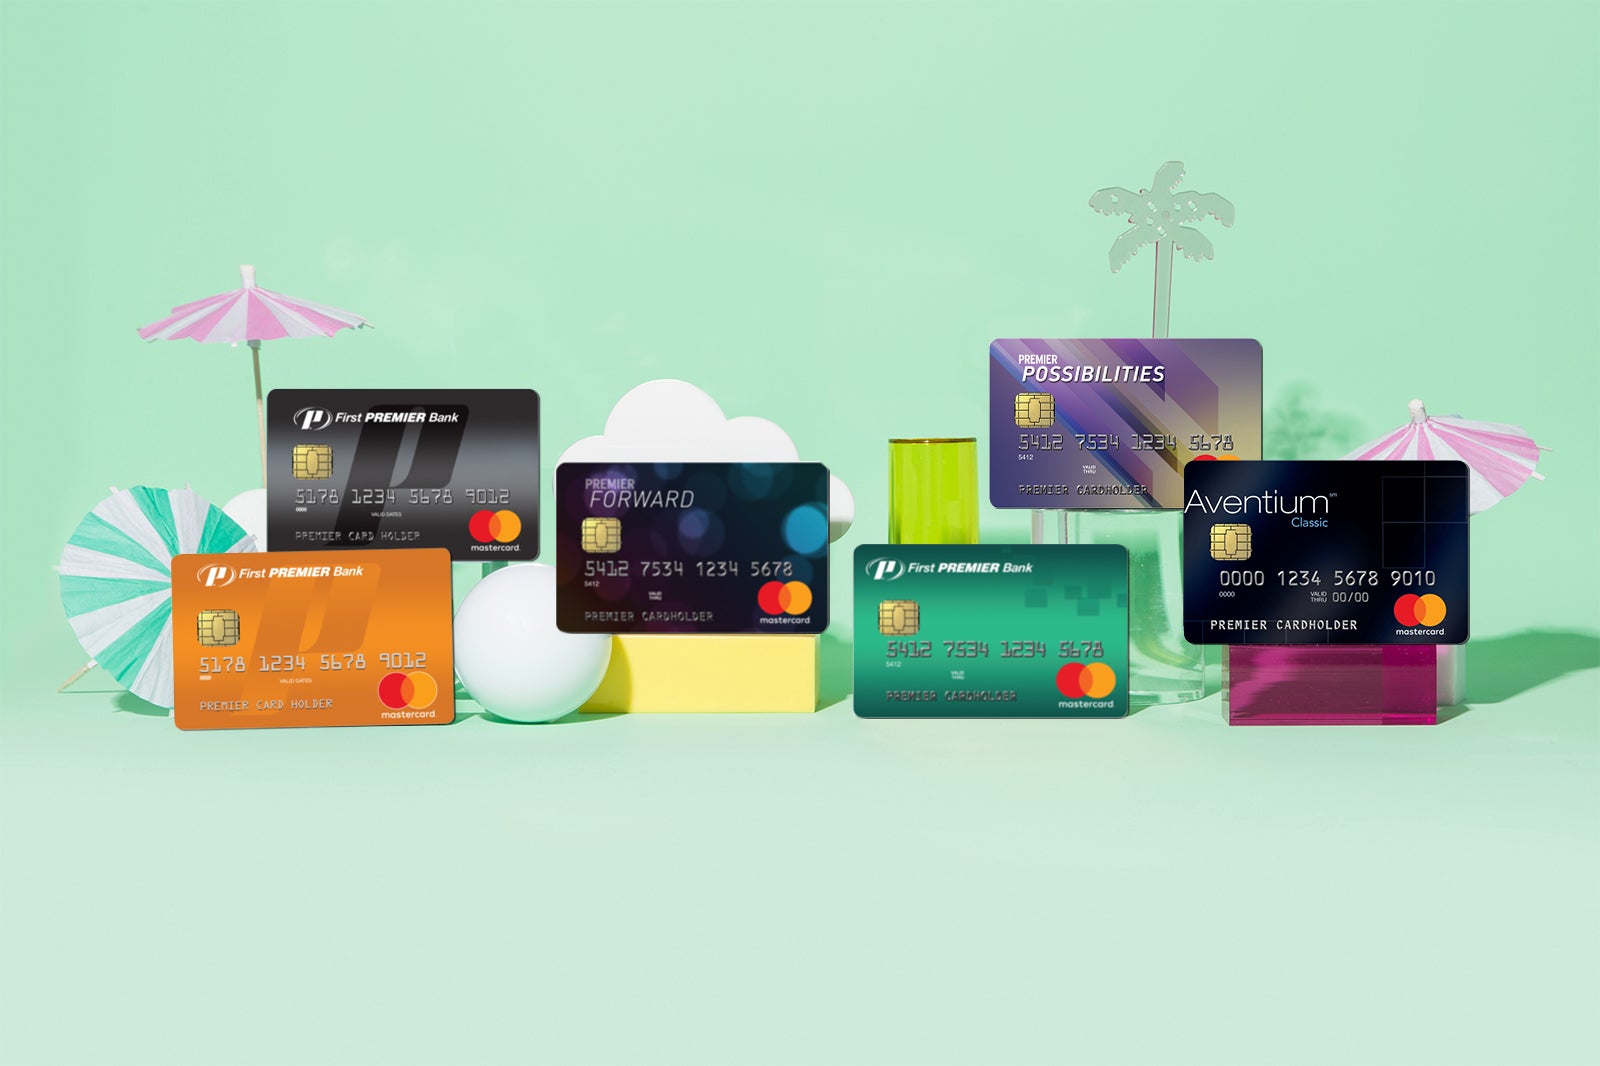 First Premier Credit Card Reviews 